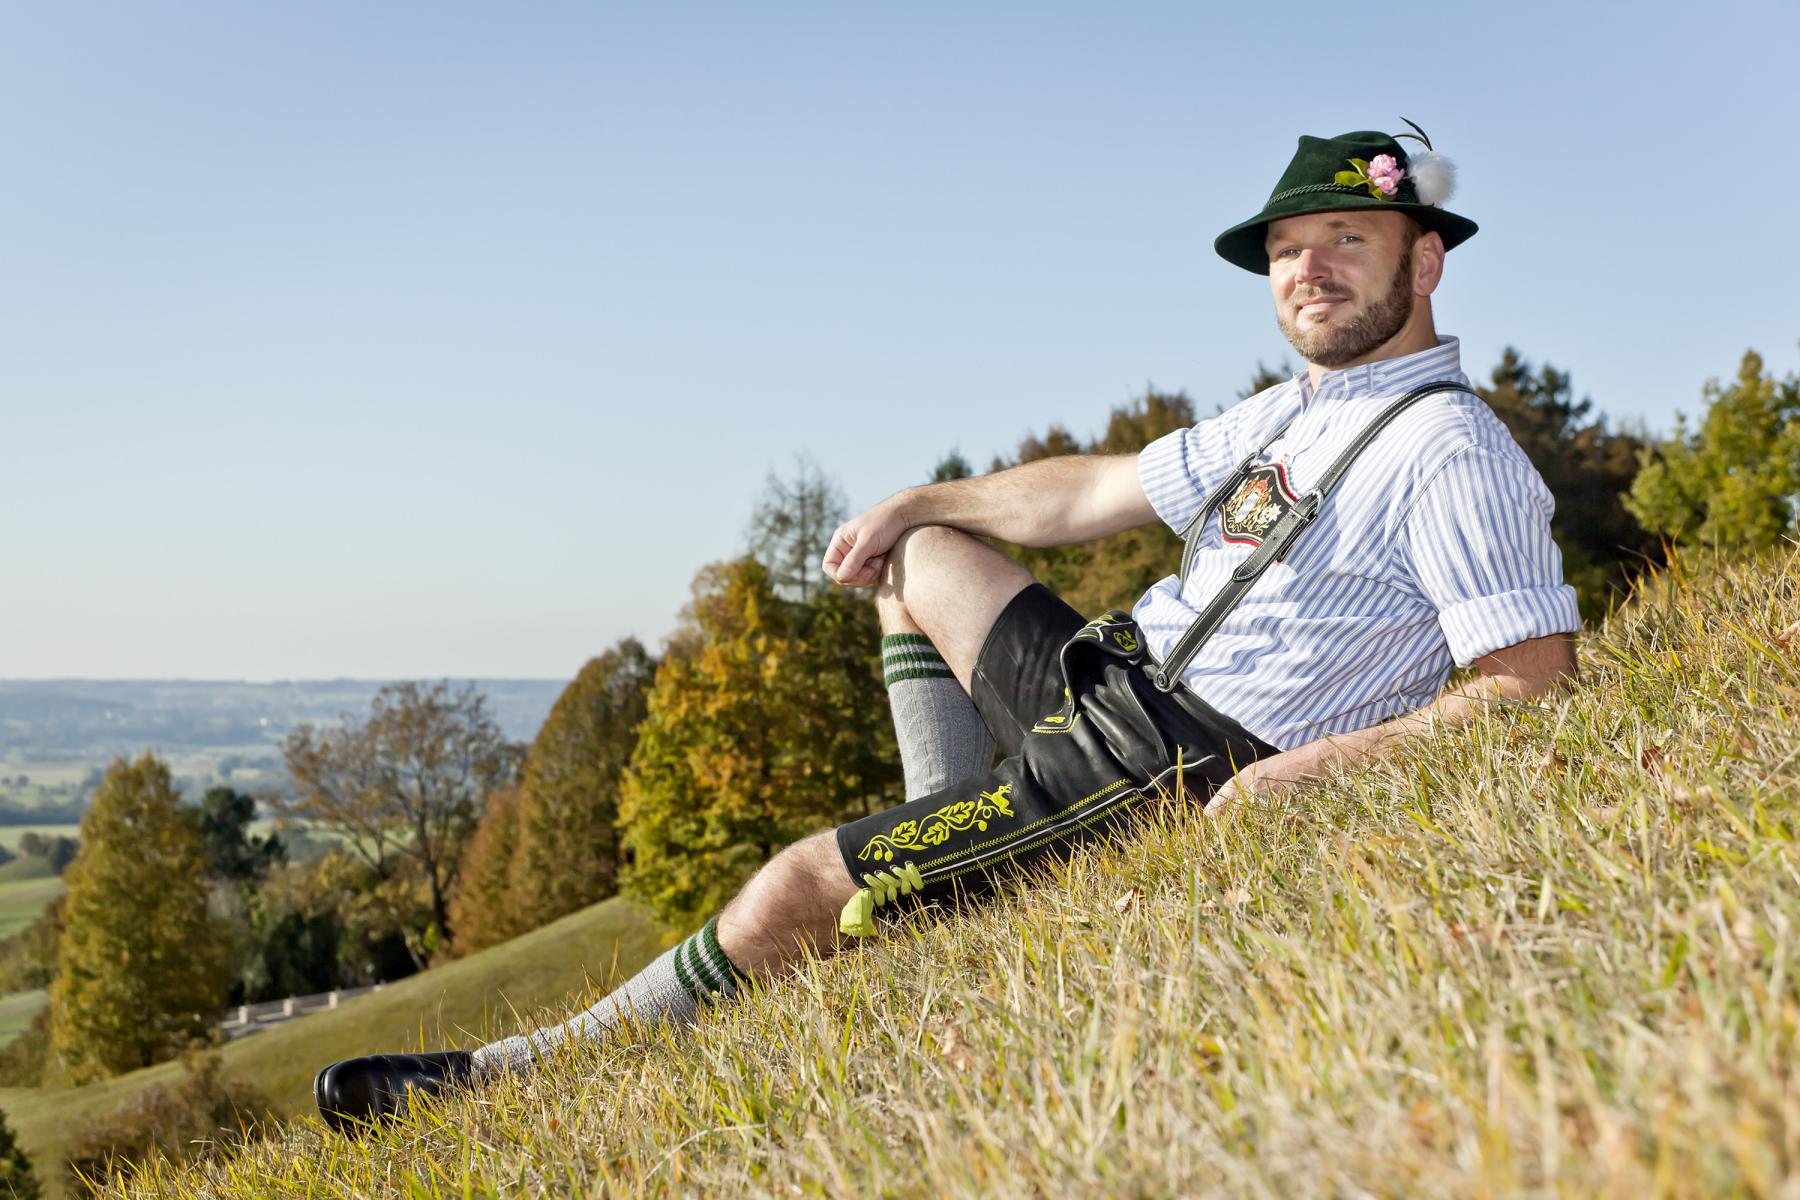 Man dressed in traditional costume (Tracht) on a mountain slope